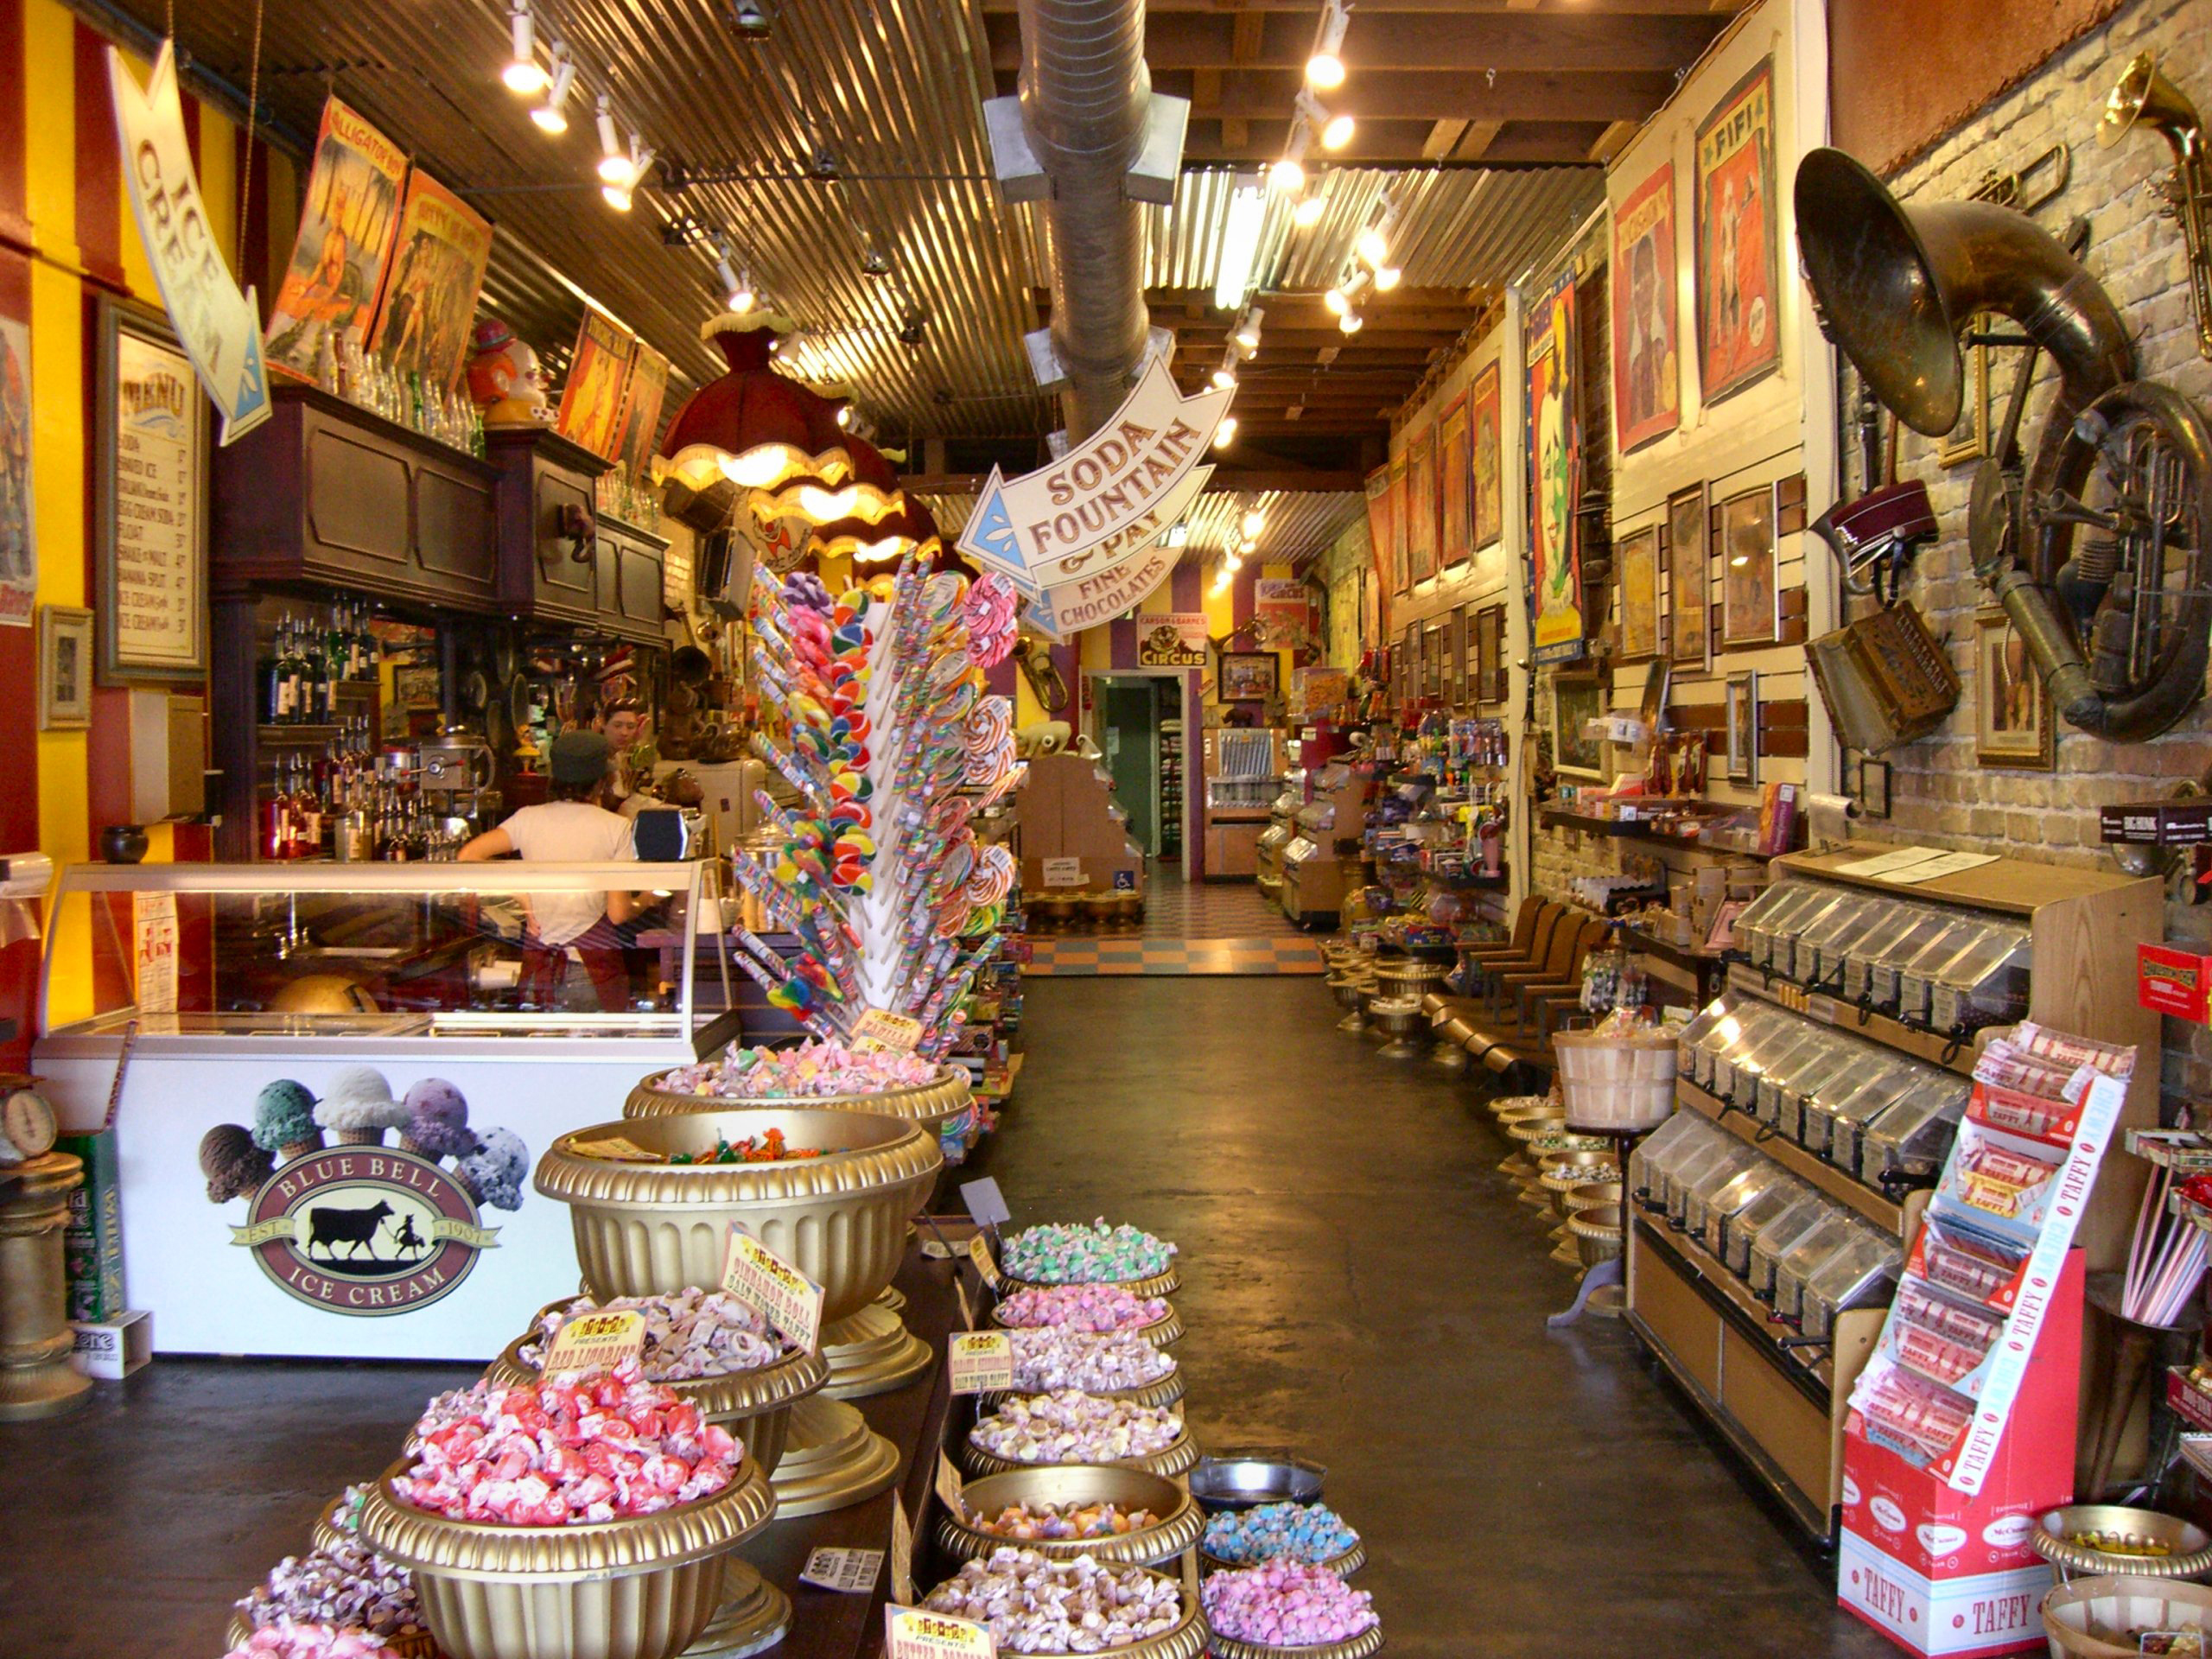 Candy shop in South Austin